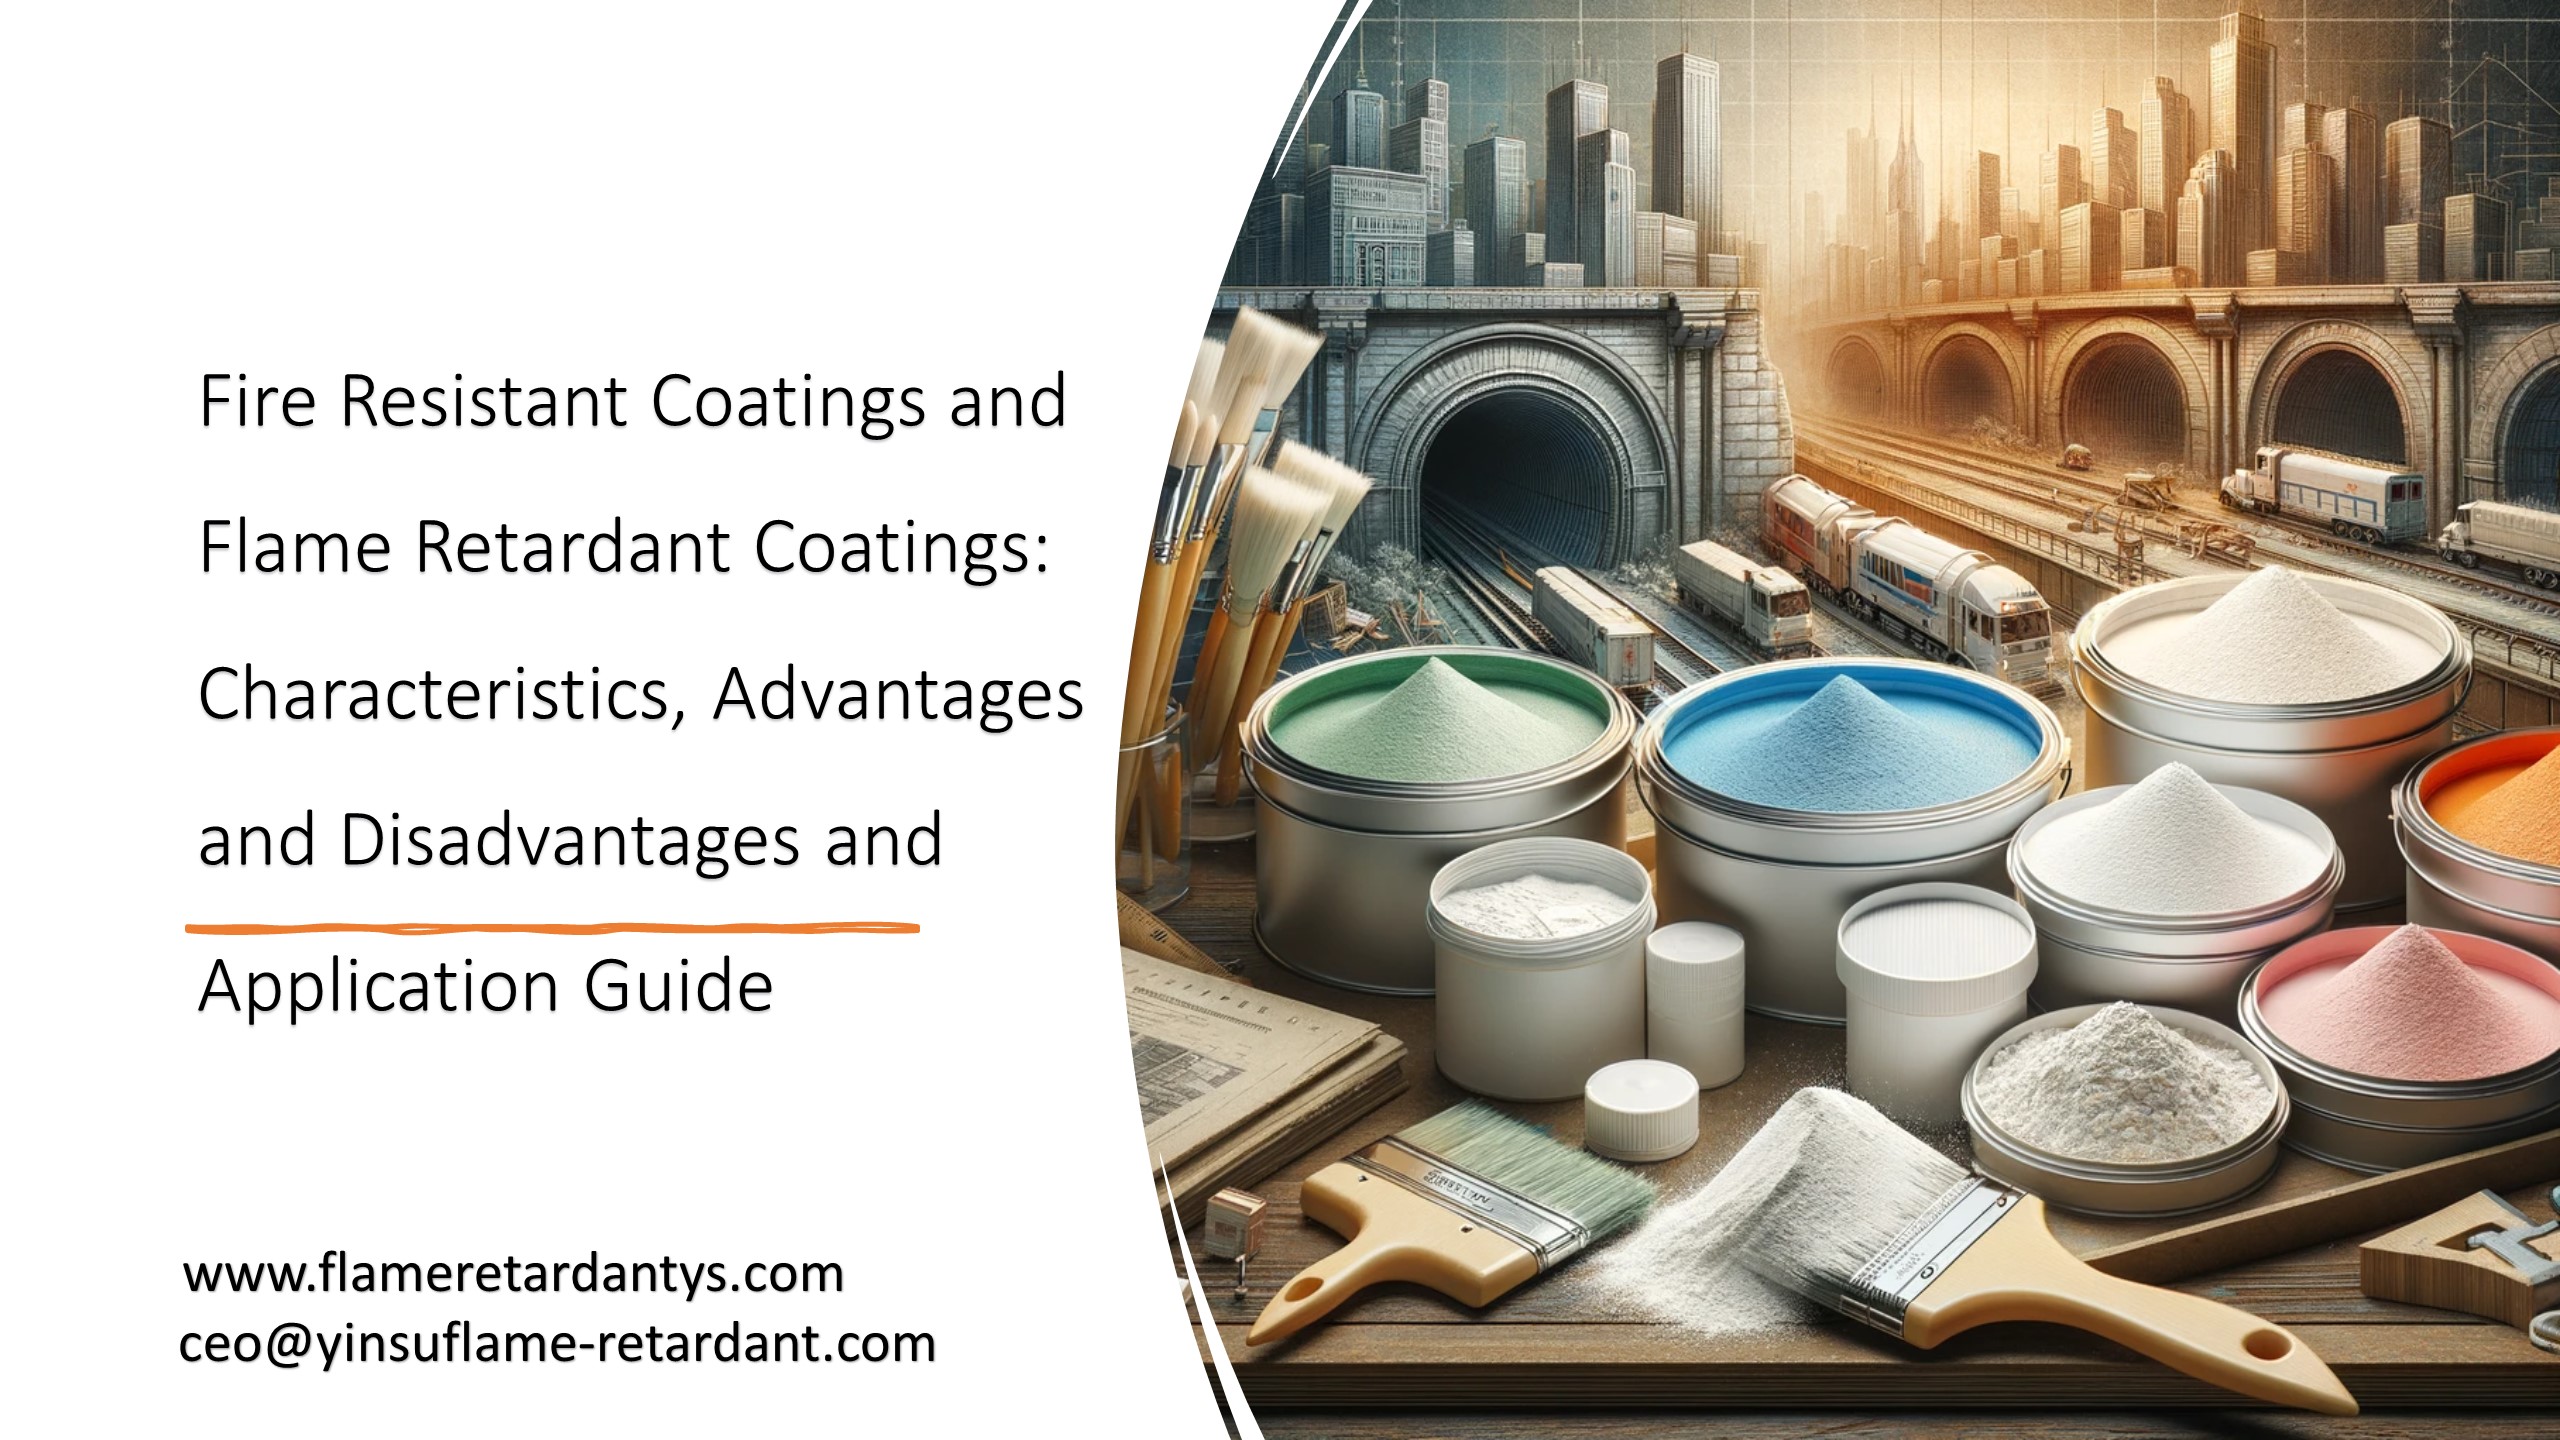 Fire Resistant Coatings and Flame Retardant Coatings Characteristics, Advantages and Disadvantages and Application Guide1